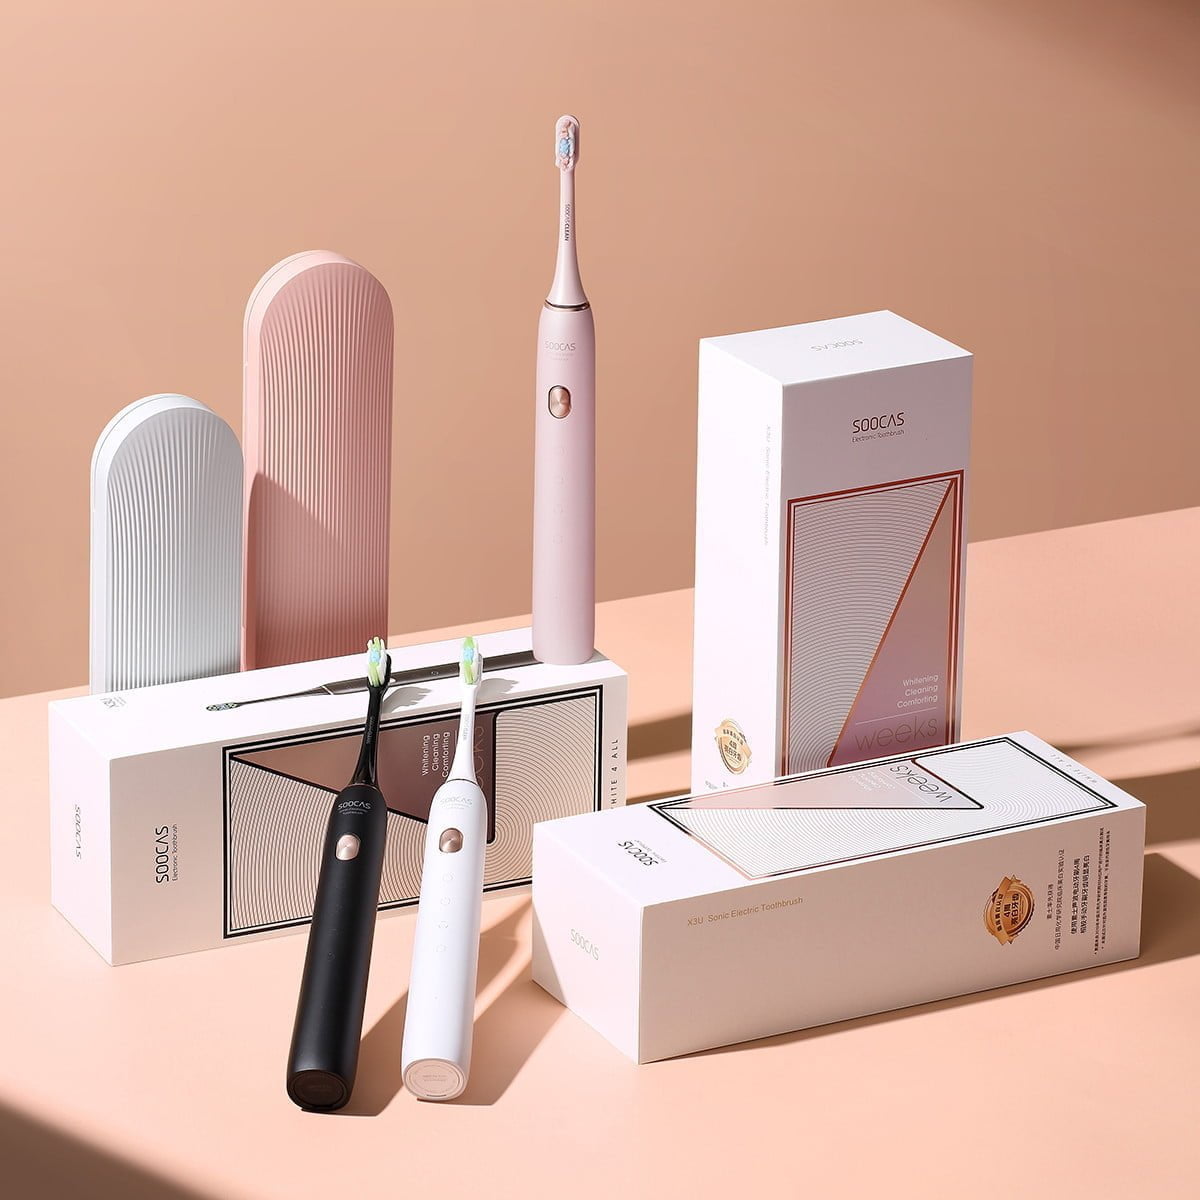 82E09C5C Ff7A 4Aee 9818 84Ef52B719D2 Xiaomi Xiaomi Toothbrush Soocare X3U, Soocas Upgraded Electric Sonic Vibration Waterproof Lightning-Fast Charging 2020 Newest Version [Video Width=&Quot;1280&Quot; Height=&Quot;720&Quot; Mp4=&Quot;Https://Lablaab.com/Wp-Content/Uploads/2020/05/Khn4Gzxy4Rcnwtethdd__Hd.mp4&Quot;][/Video] Soocas X3U Sonic Toothbrush Electric (Pink) 2020 Model